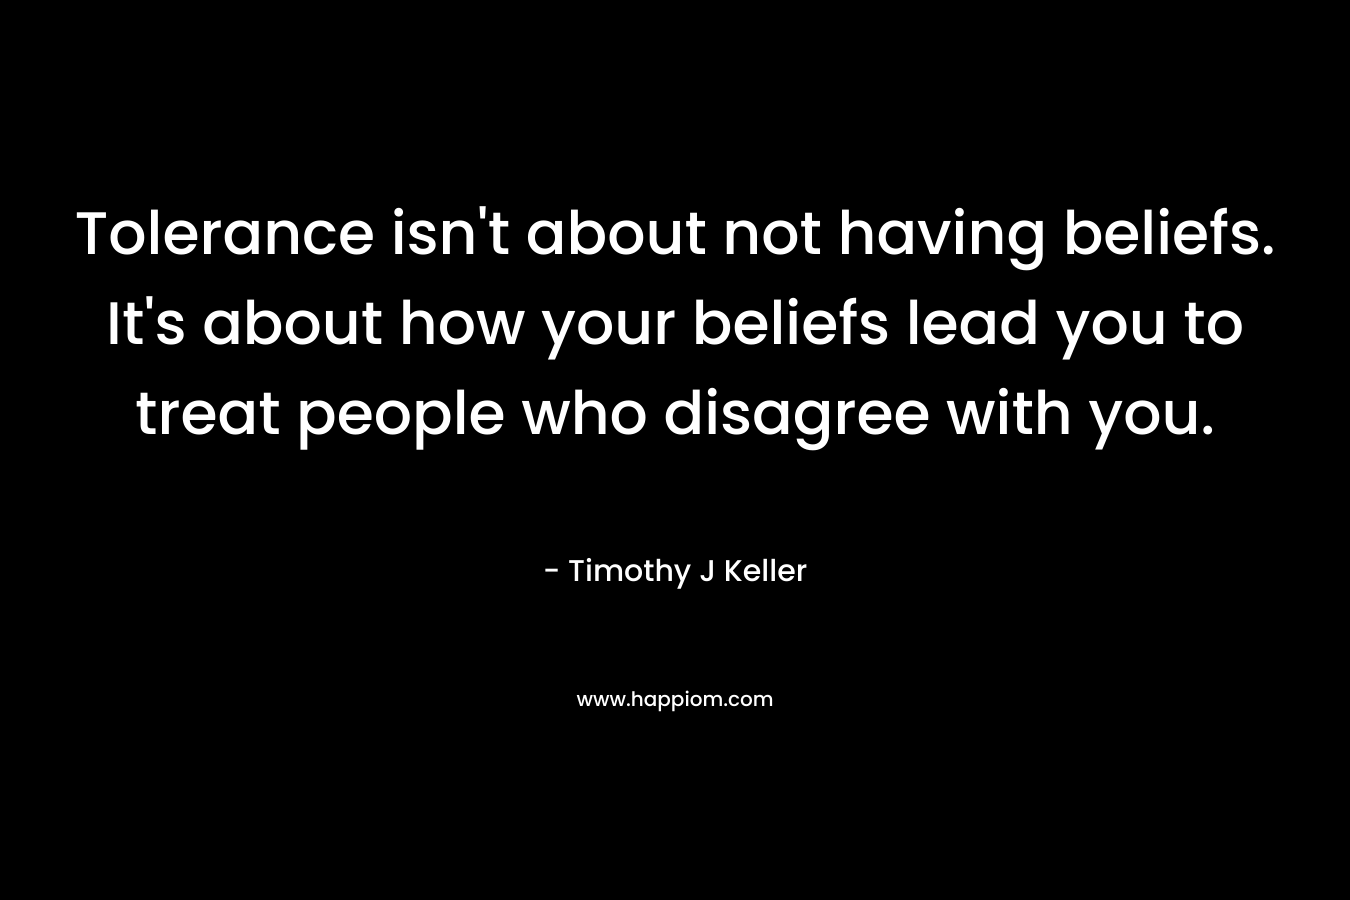 Tolerance isn’t about not having beliefs. It’s about how your beliefs lead you to treat people who disagree with you. – Timothy J Keller